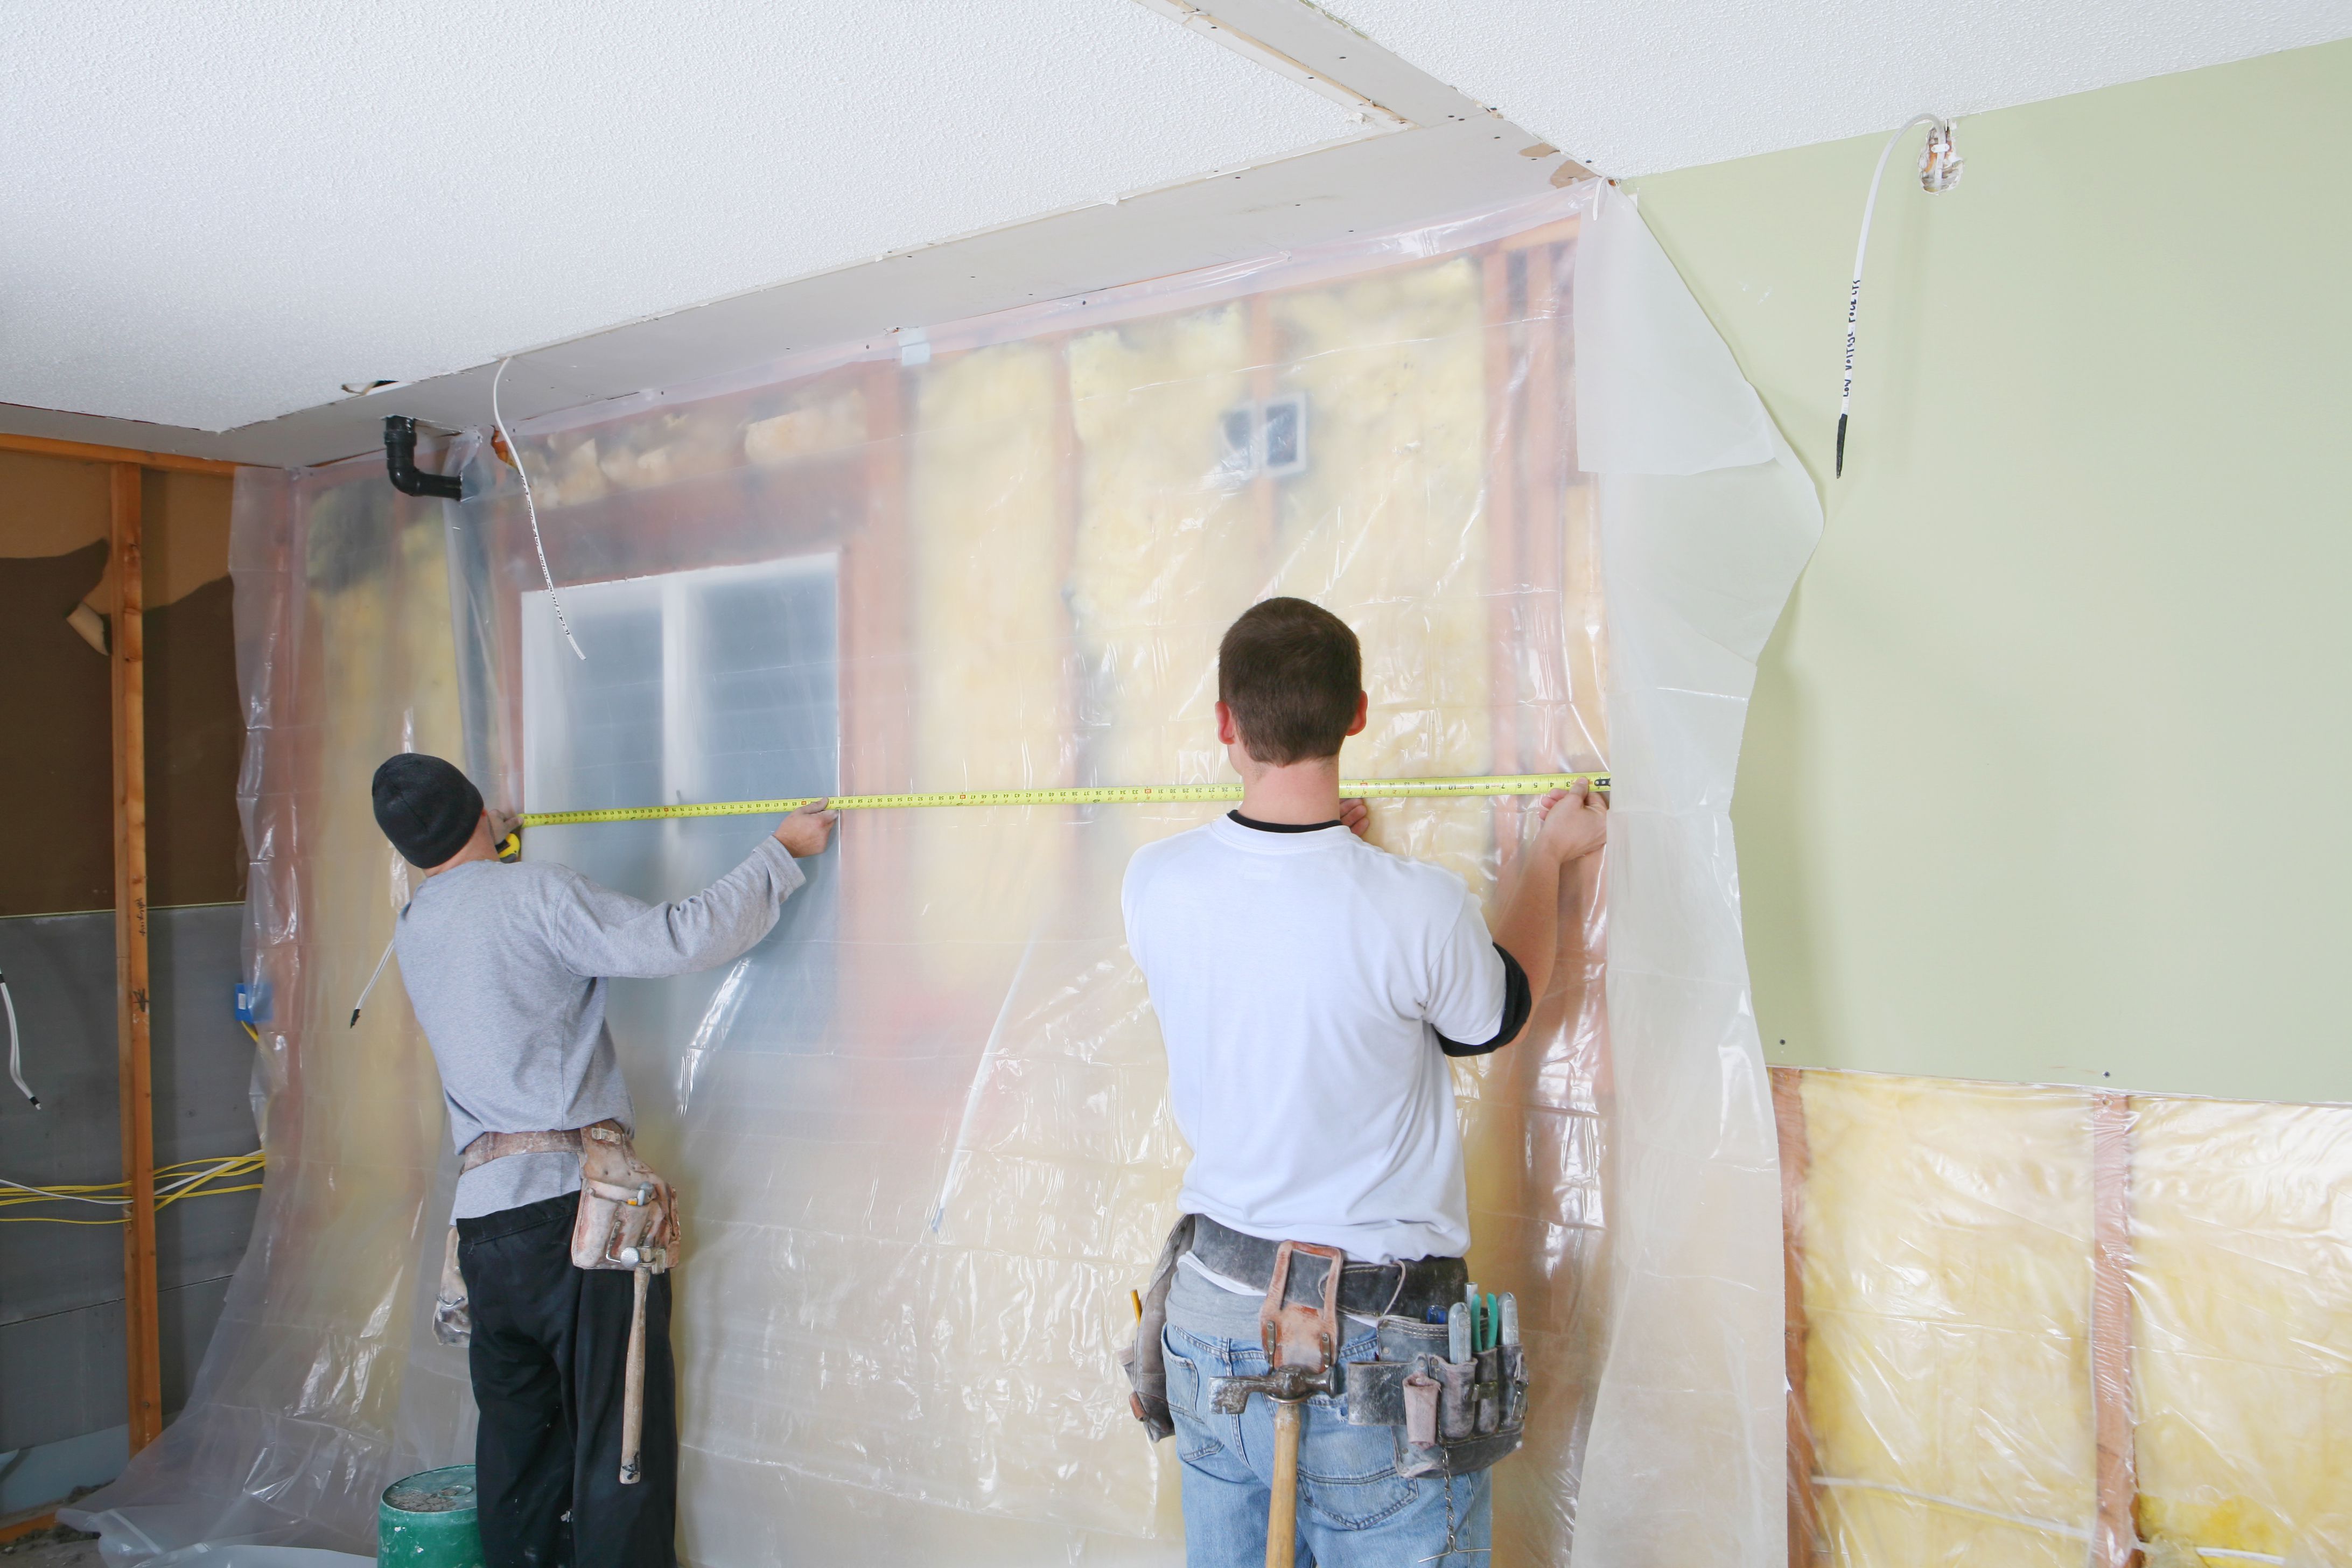 Professional Guidance on How to Hang Drywall